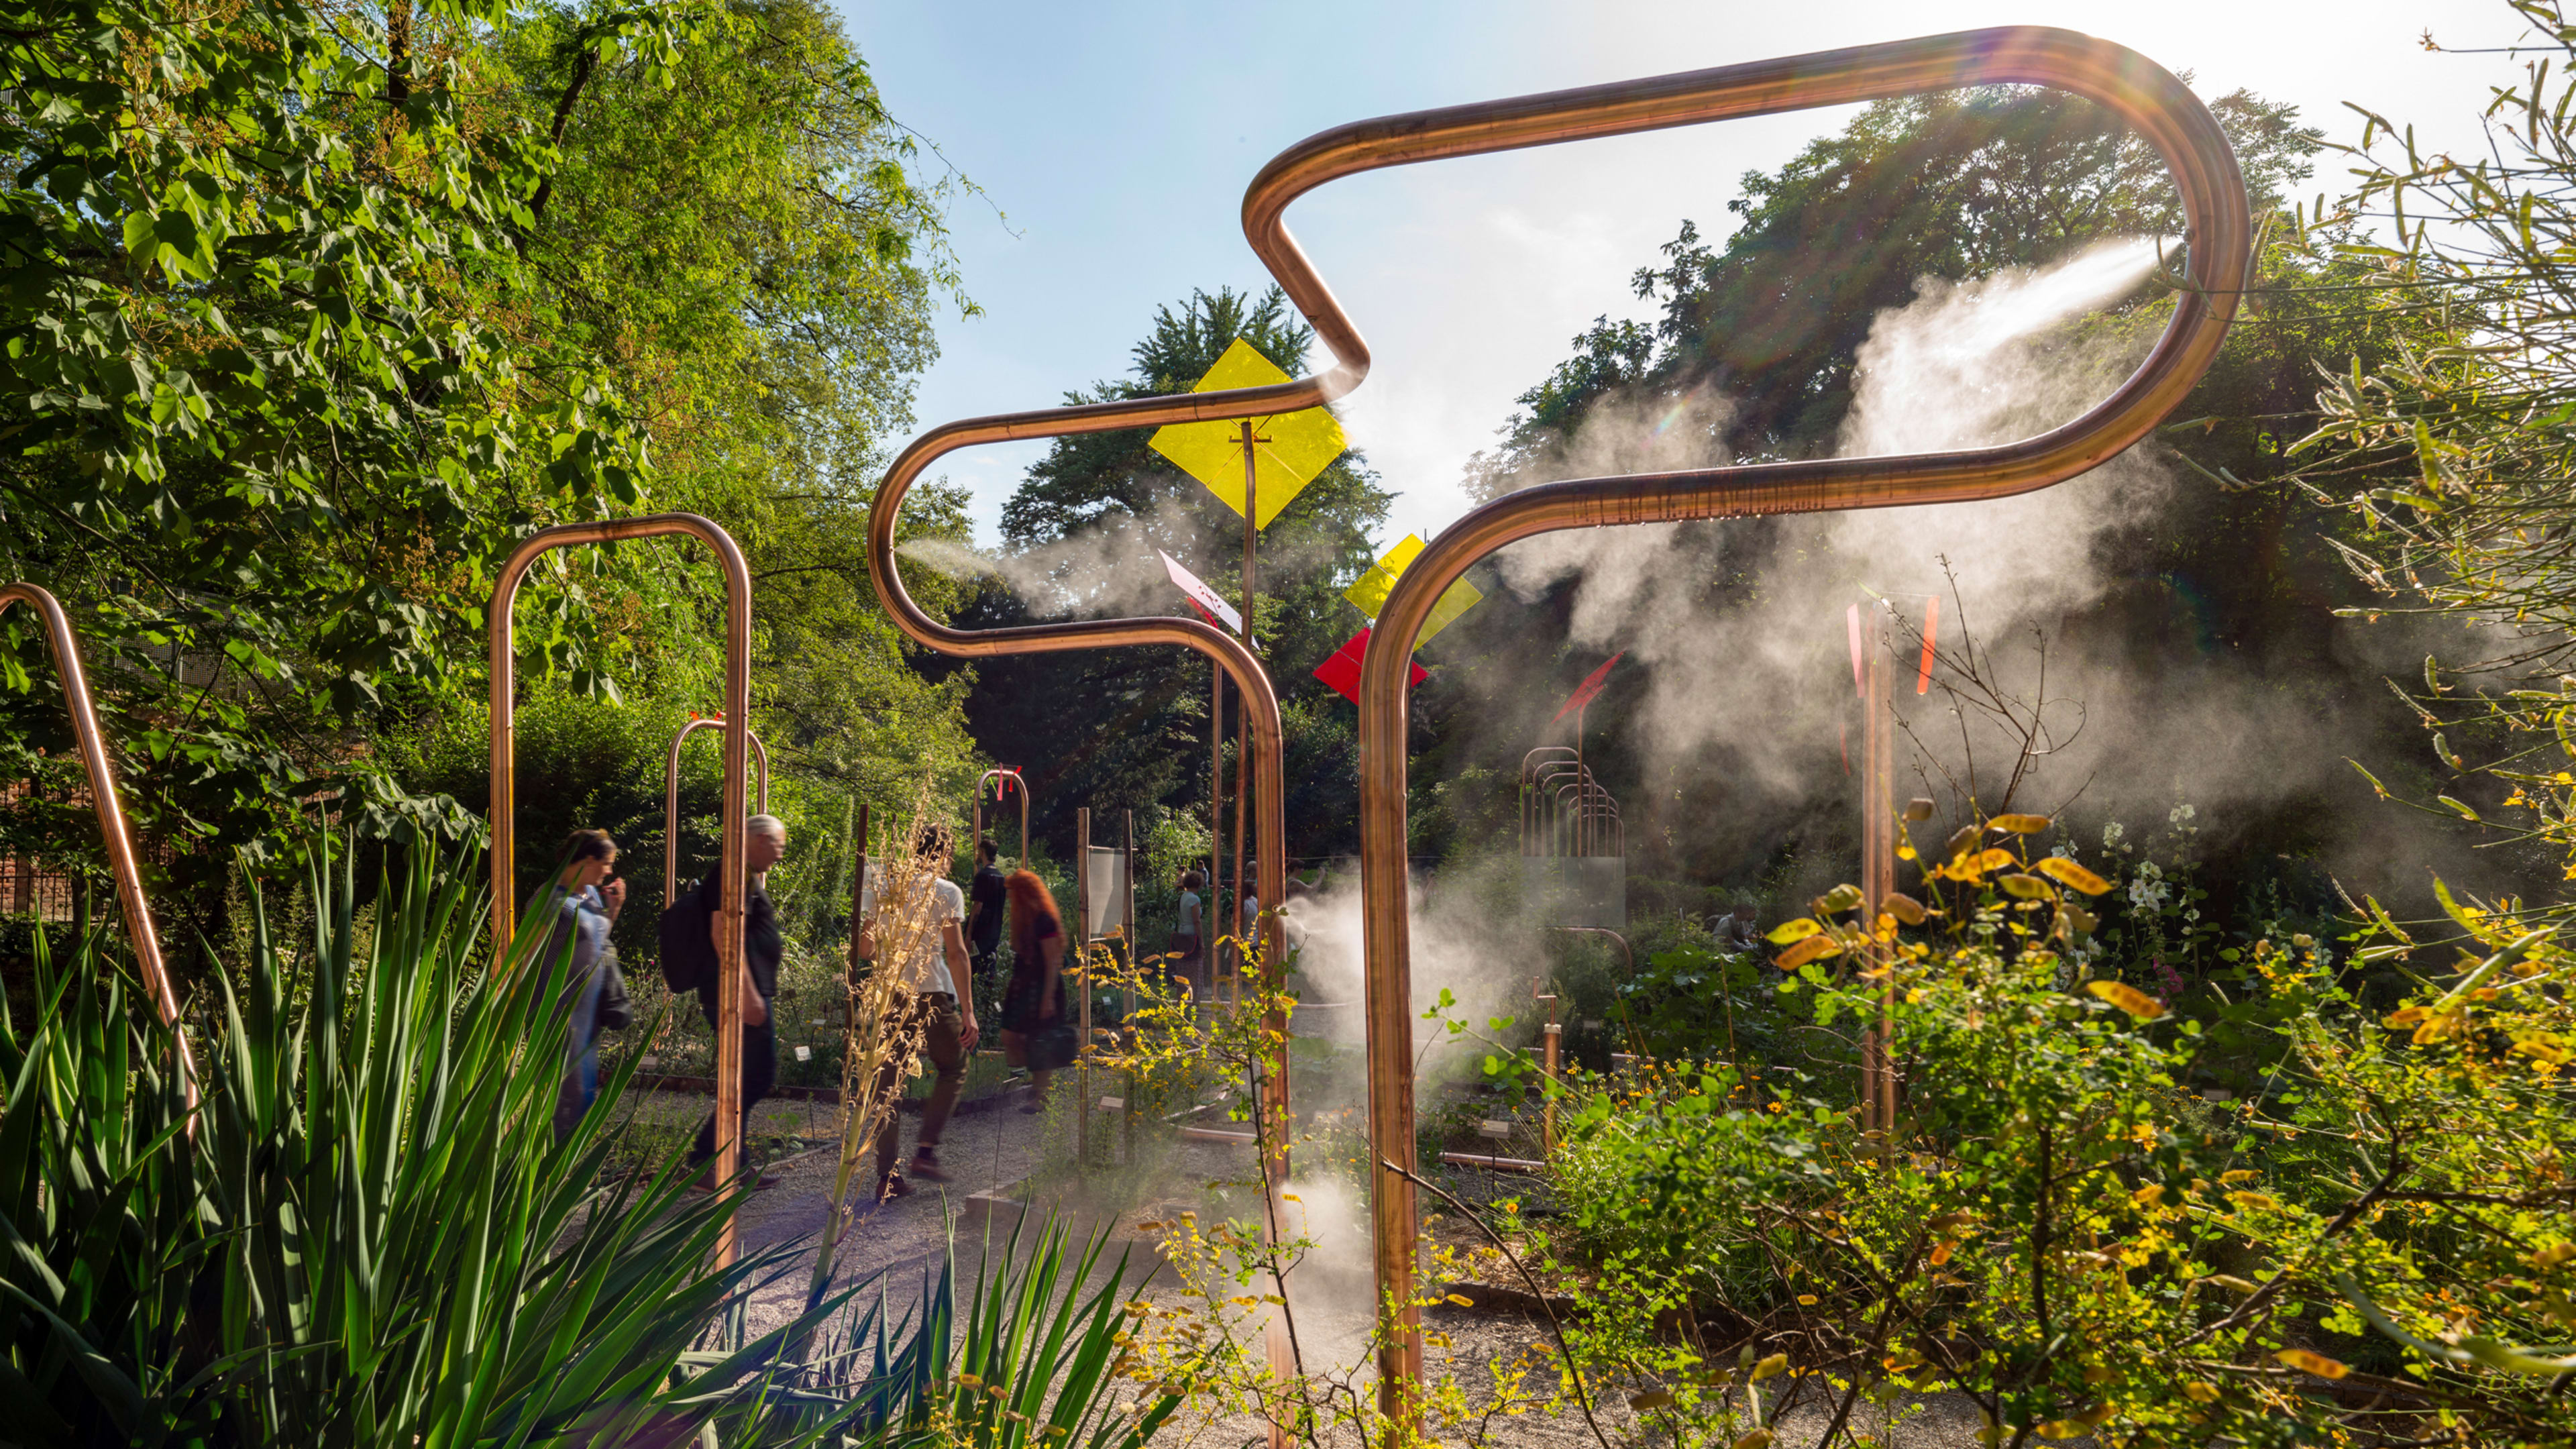 This stunning garden uses playground equipment and copper tubes to water itself